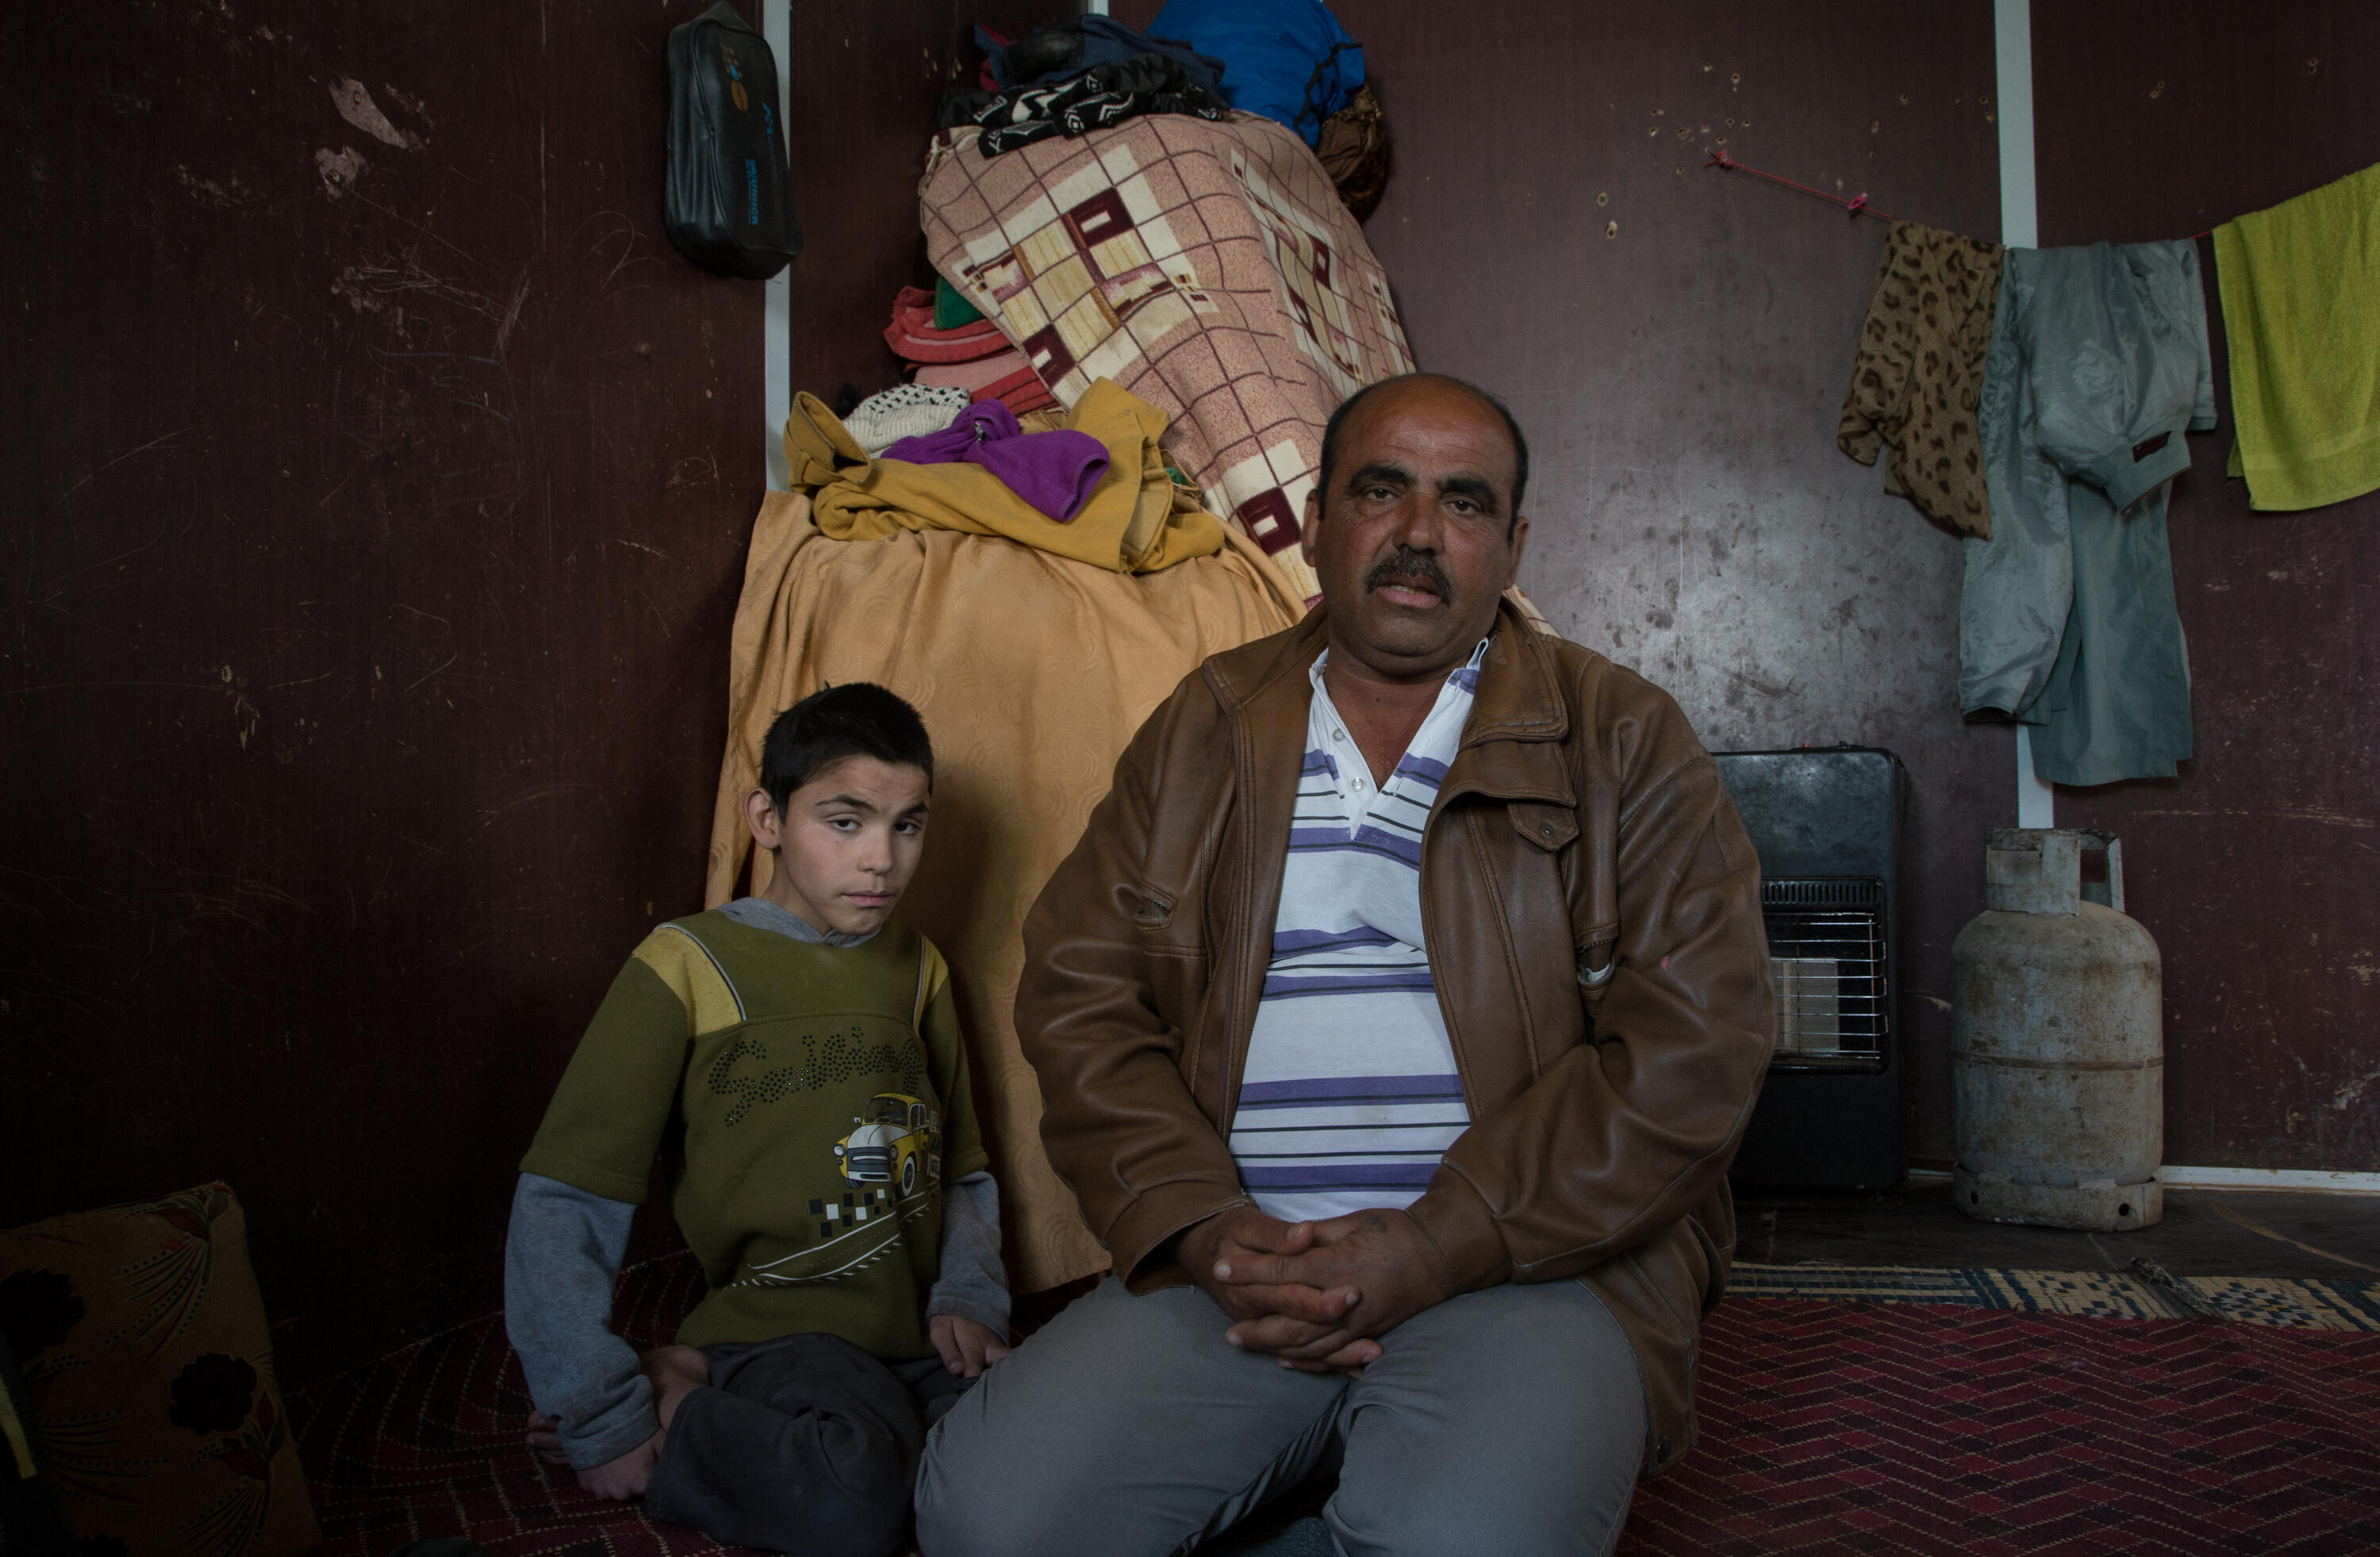 Abu Raed sits with his son Bashar, who is paralyzed, in their family's caravan at the Zaatari refugee camp in Jordan.